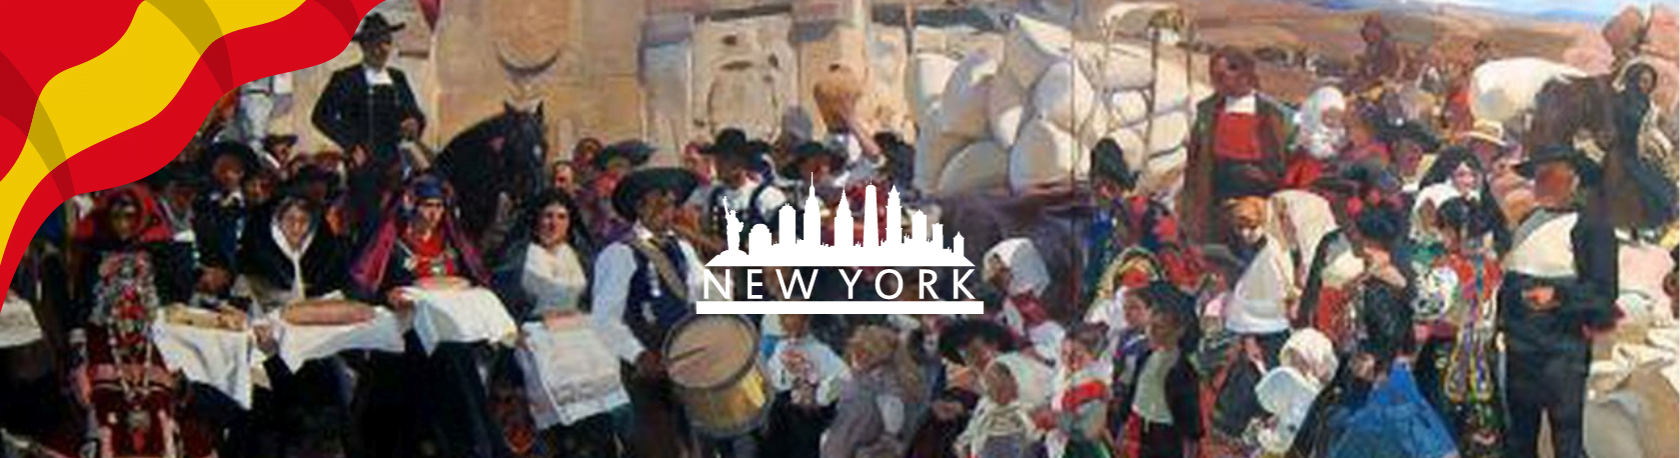 Spruce up your Spanish vocabulary while learning about the impressive Sorolla collection at the Hispanic Society of America museum